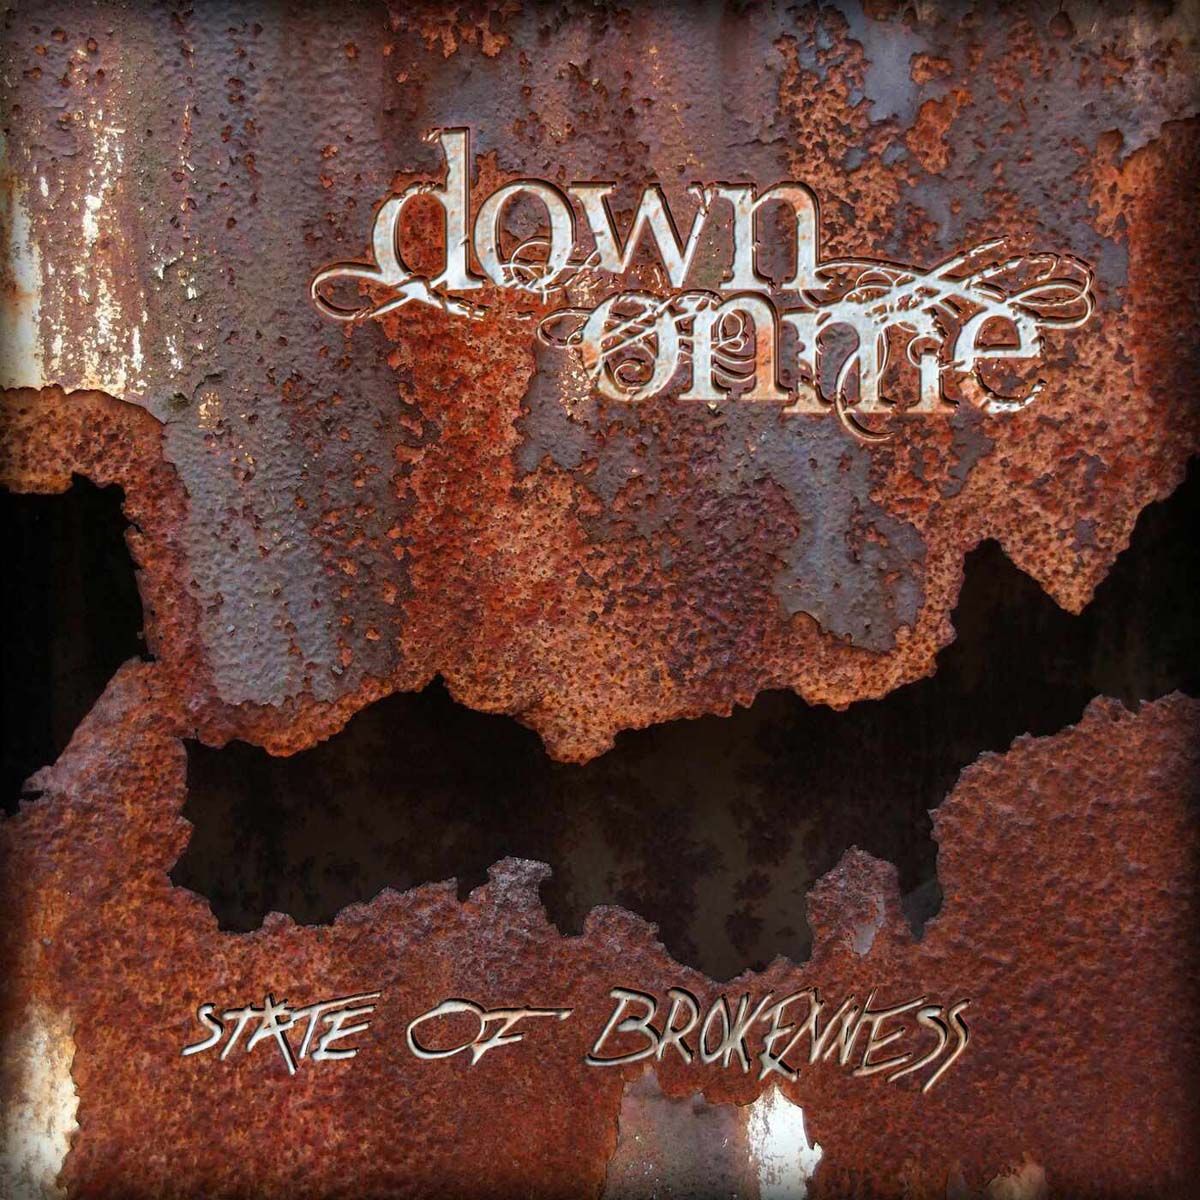 Down On Me - State Of Brokenness